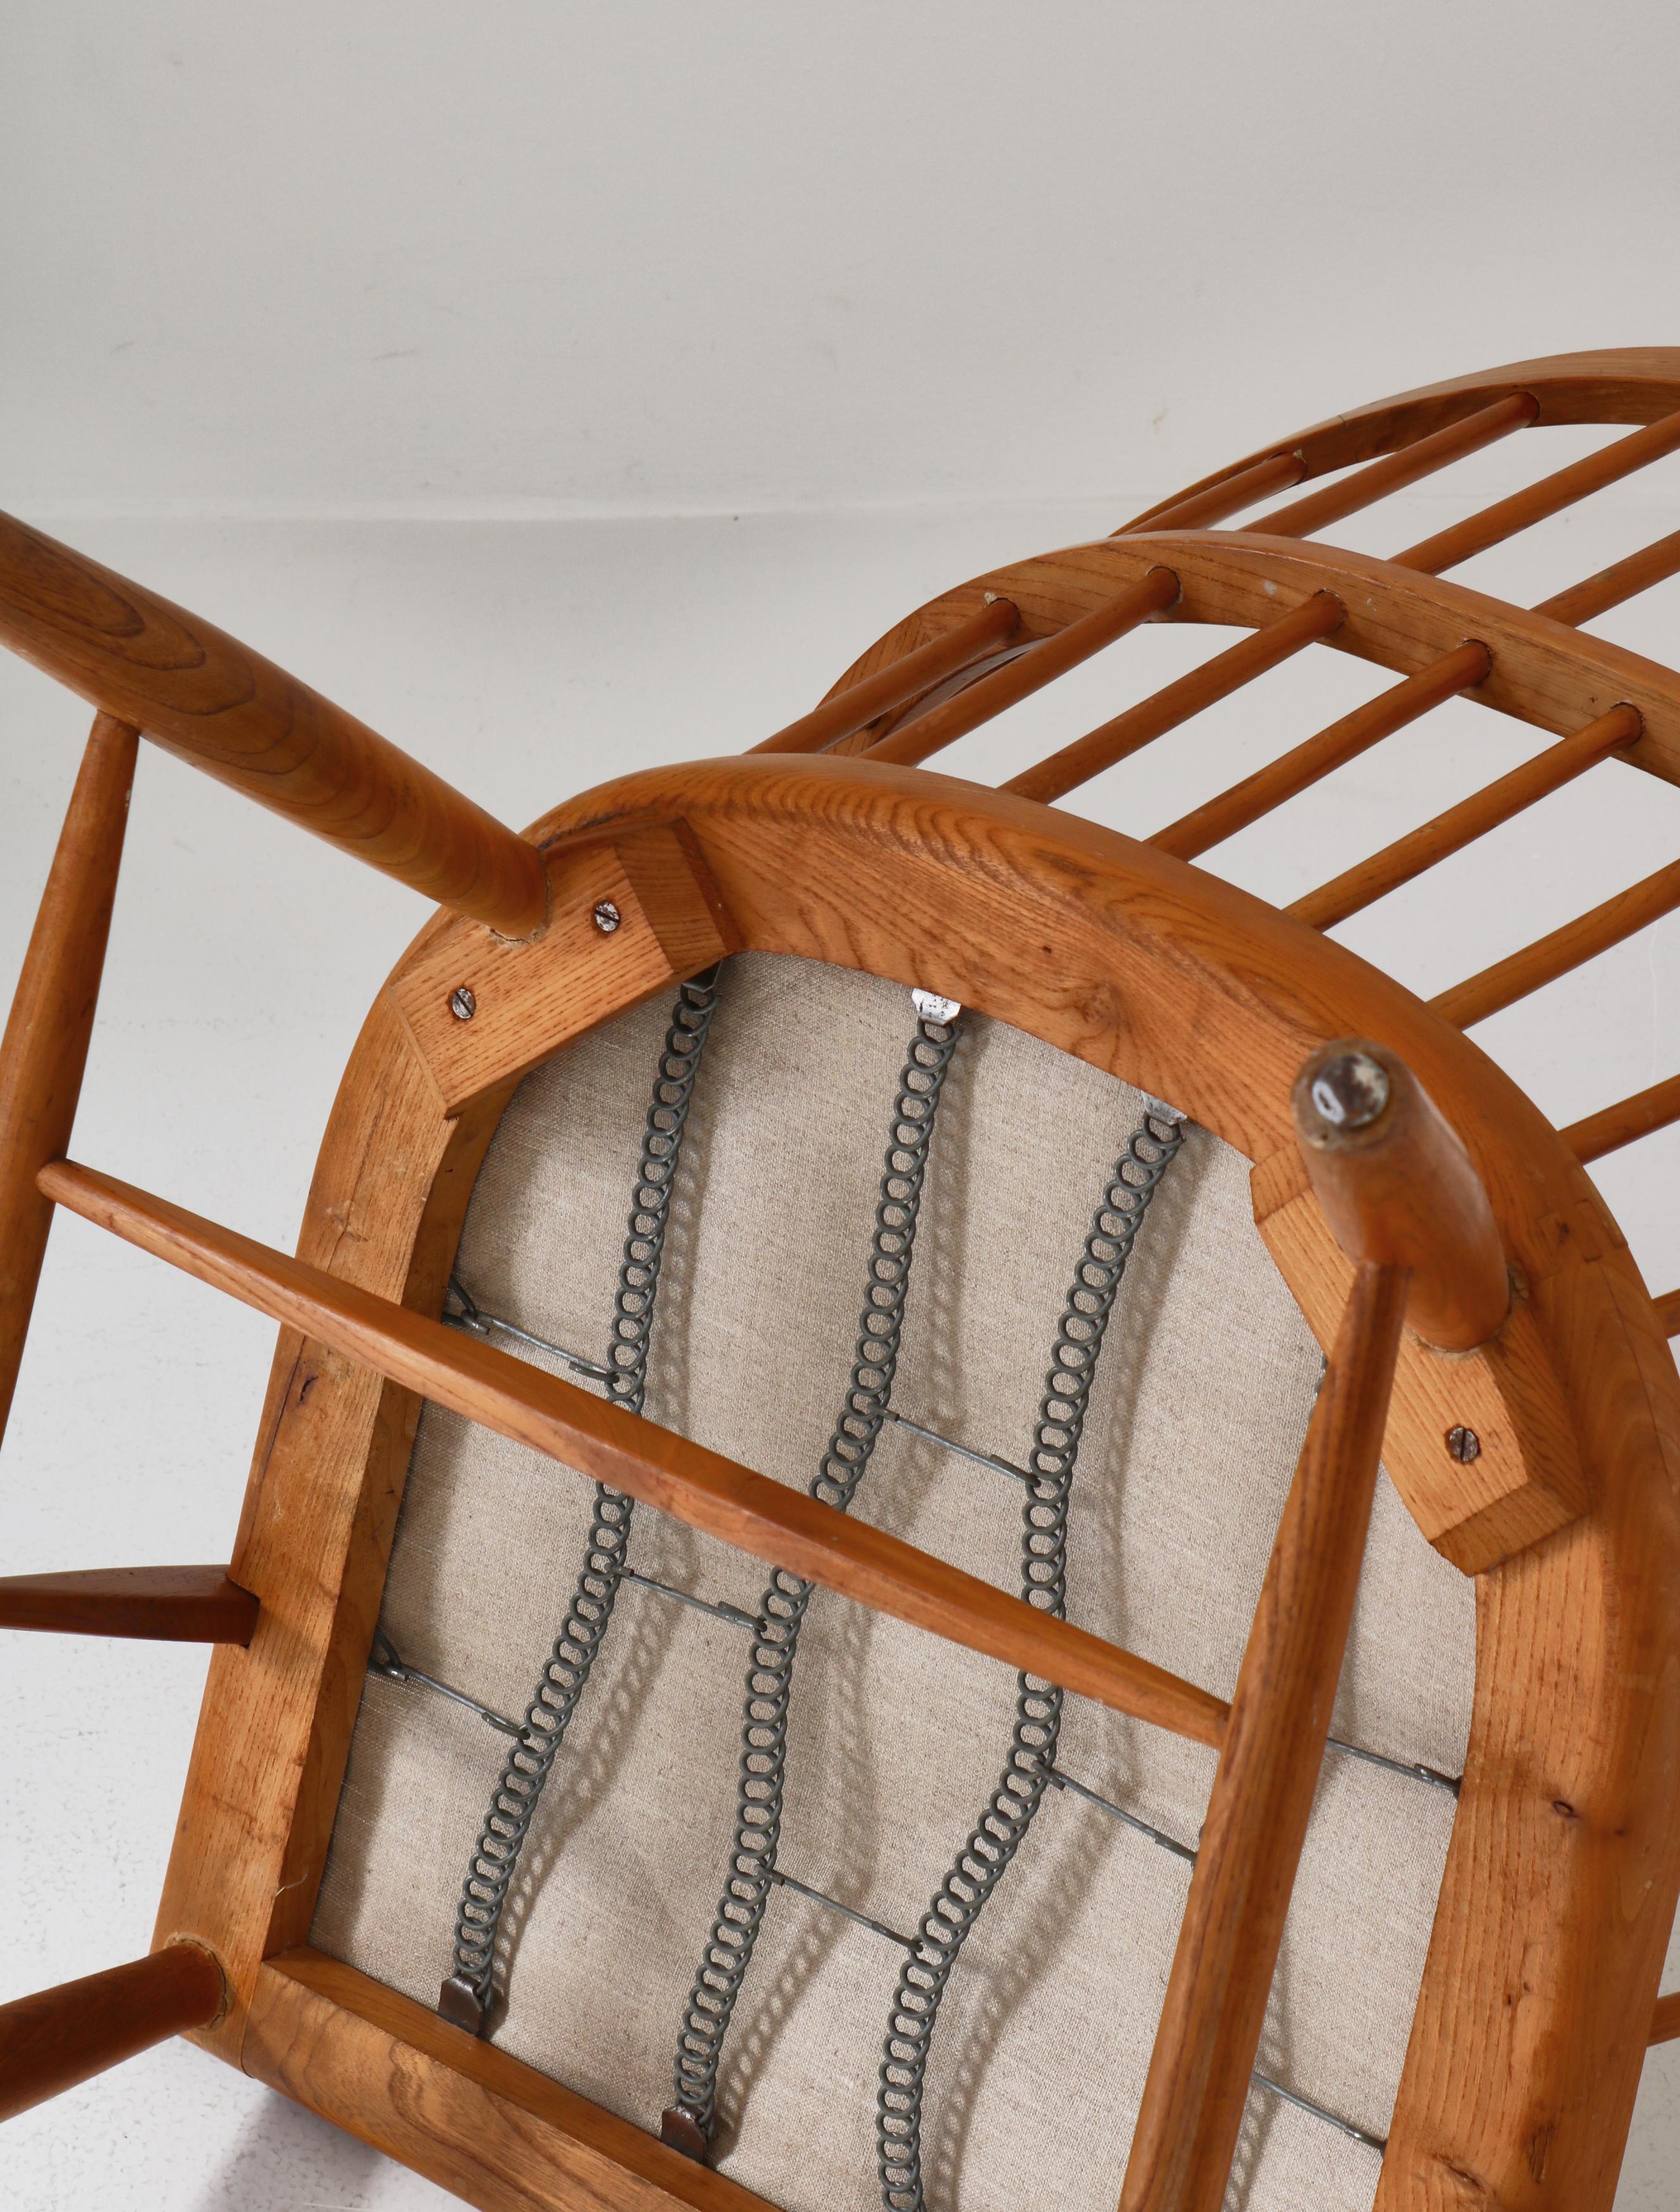 Scandinavian Modern Windsor Chair in Patinated Ash and White Bouclé, 1940s For Sale 11